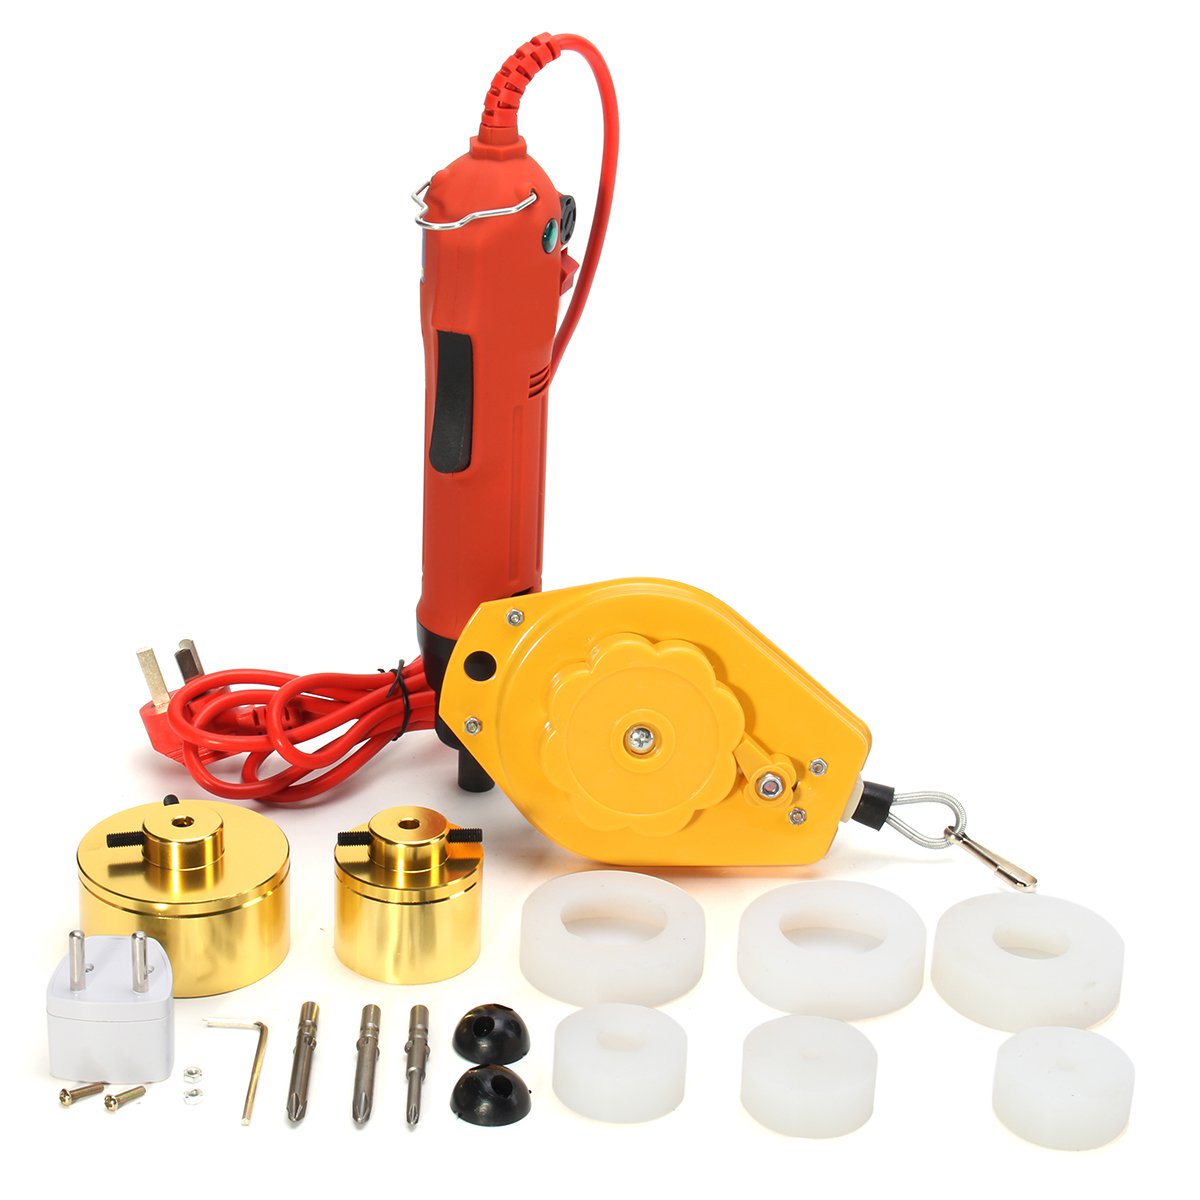 220V-Handheld-Electric-Drill-Bottle-Capping-Machine-Cap-Sealer-Seal-Ring-Machine-1189790-4